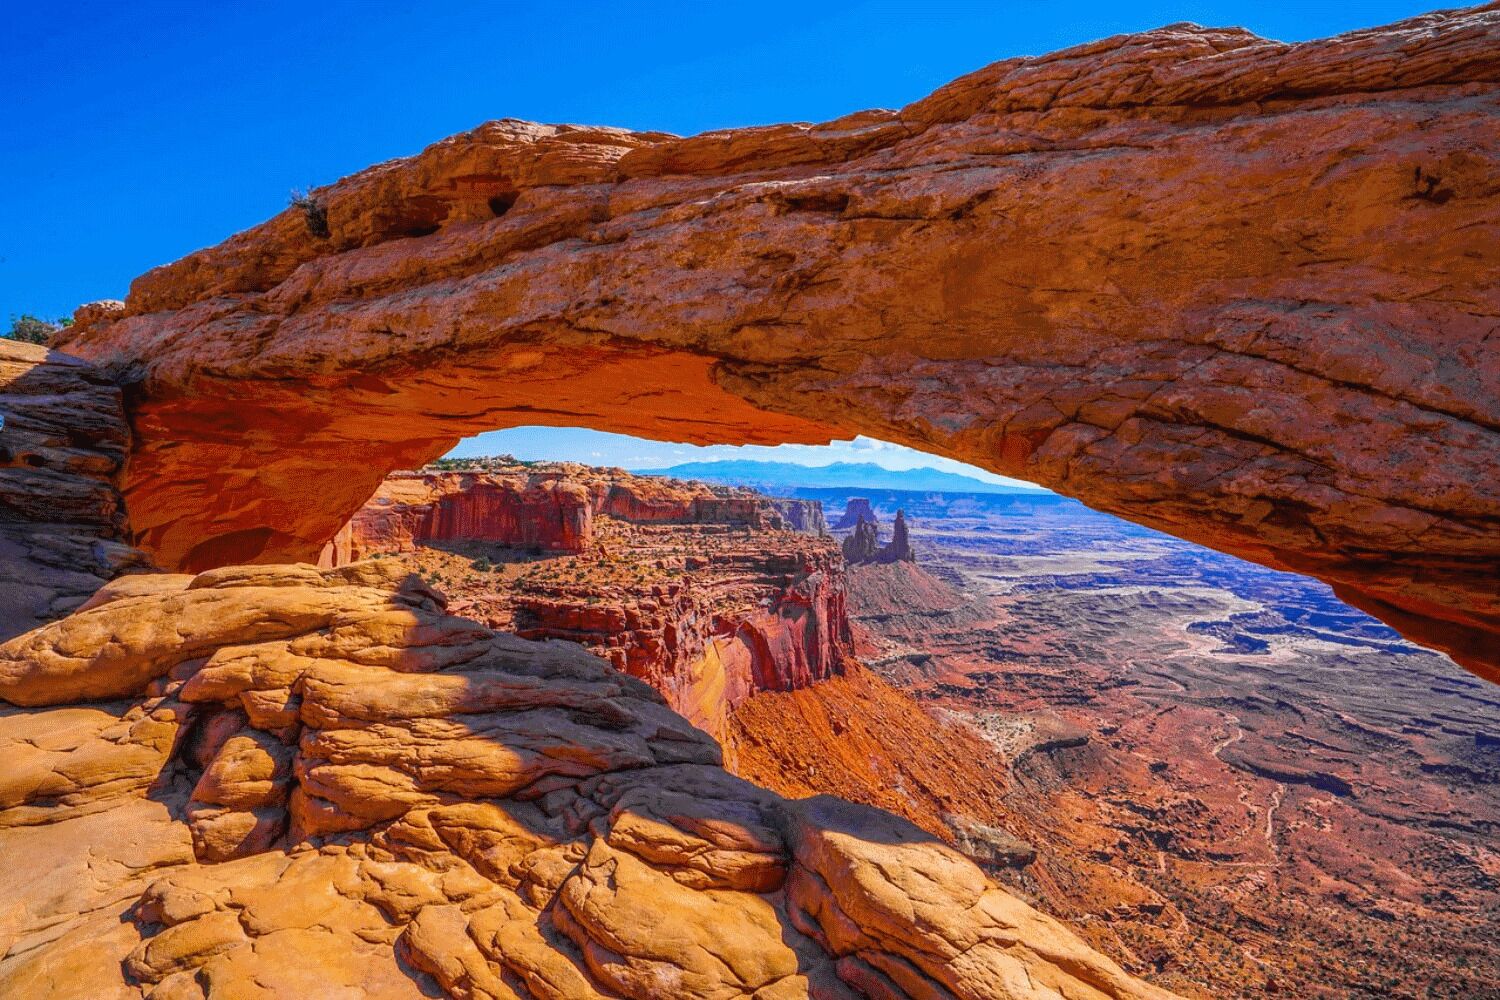 10 TOP Things to Do in Moab, UT (2021 Attraction & Activity Guide